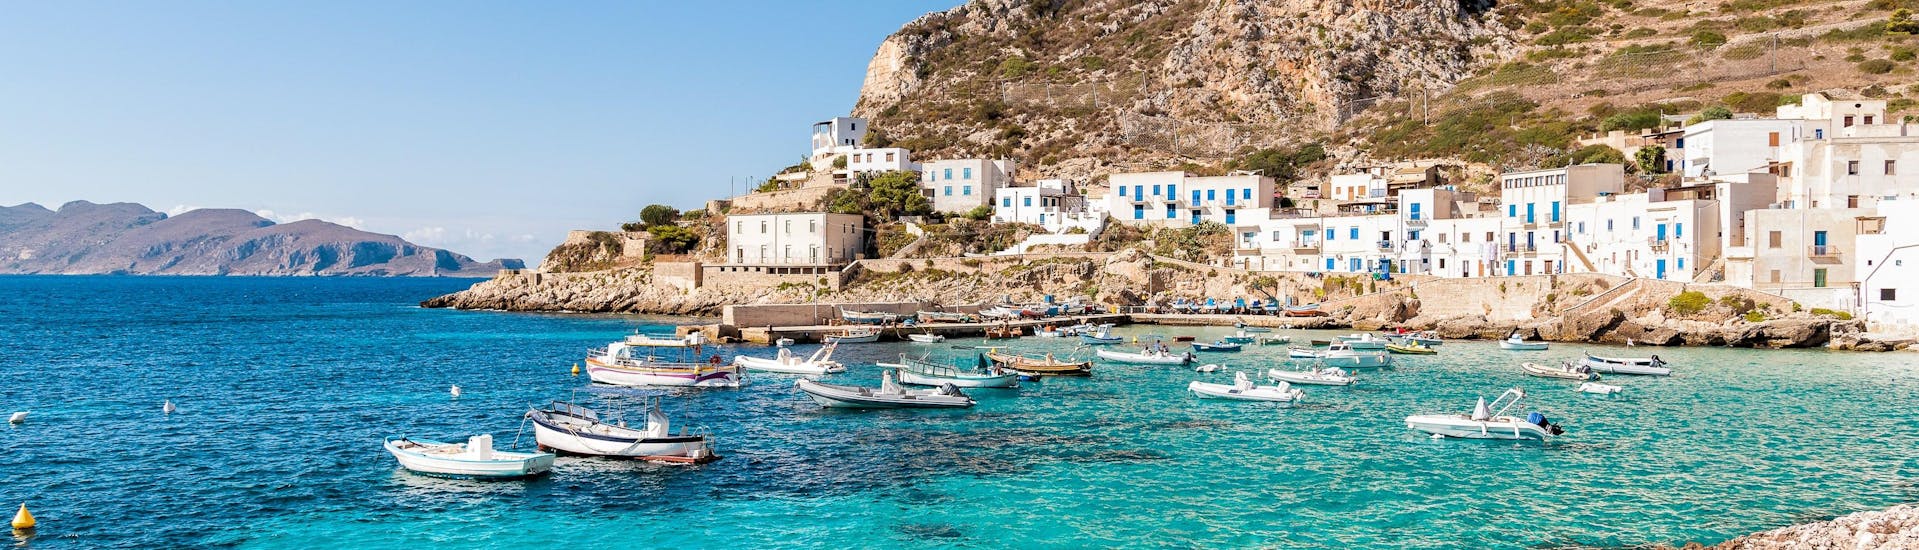 A view of the beautiful coastline that visitors can see on a boat trip to the island of Levanzo in Sicily.